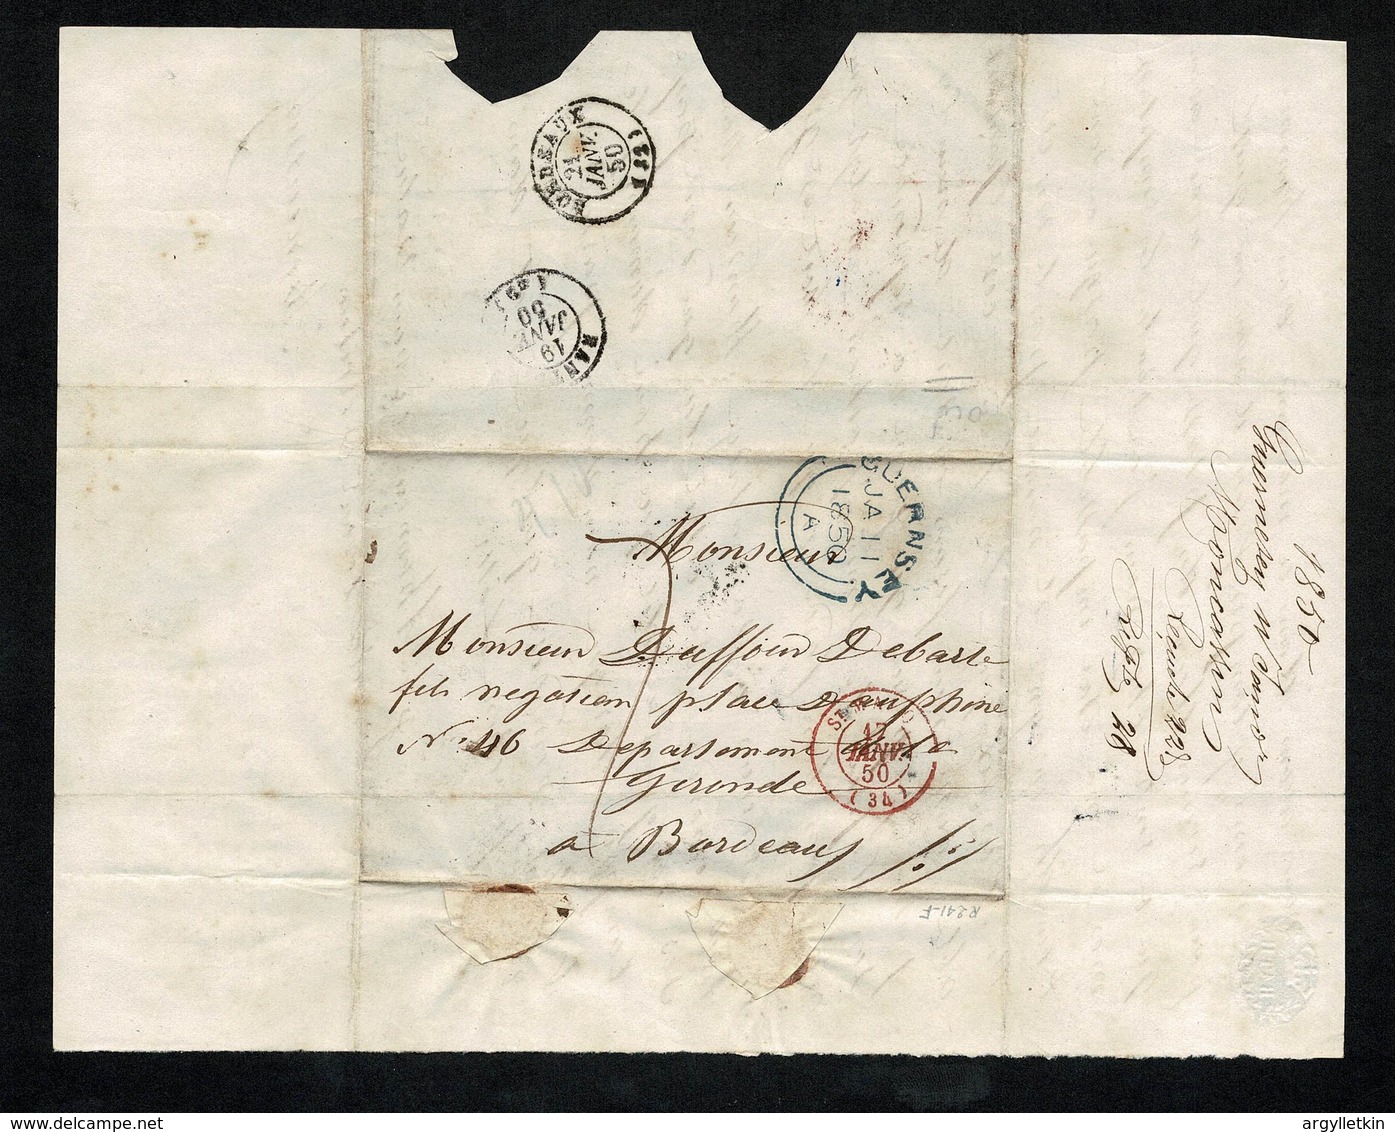 CHANNEL ISLANDS GUERNSEY 1850 AND 1873 GRANVILLE INTER ISLAND MAIL - Guernsey